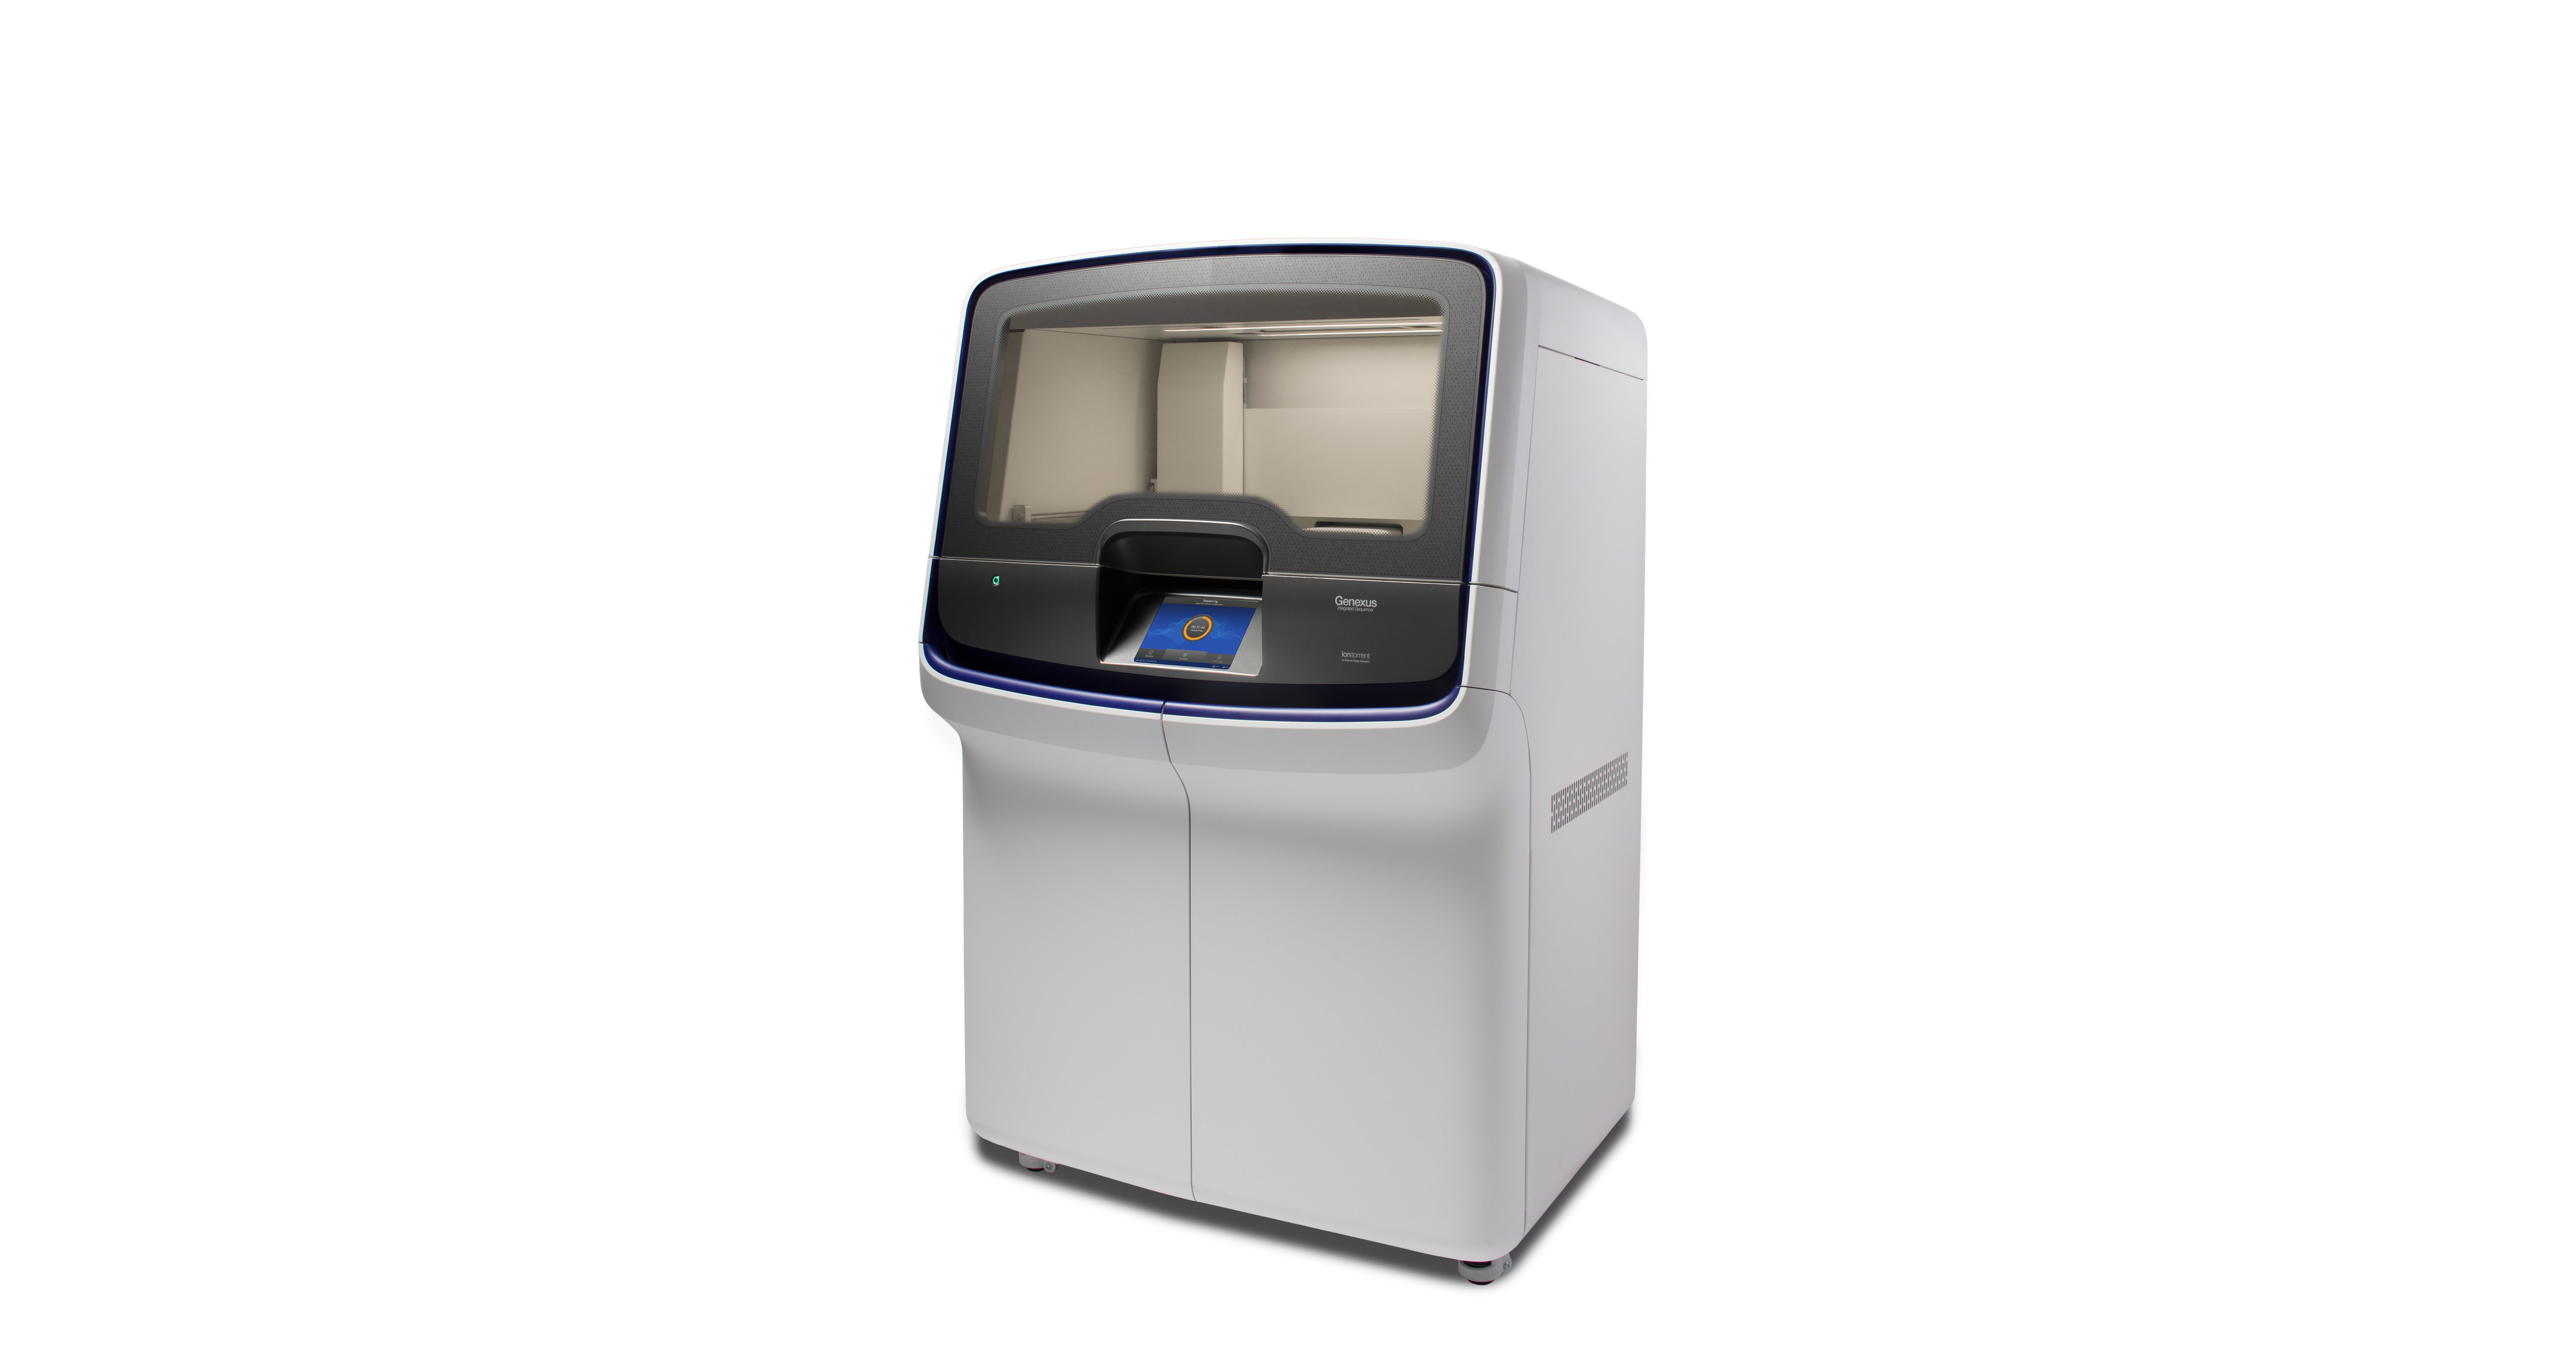 stad kleding Loodgieter Thermo Fisher Scientific Introduces First Next-Generation Sequencing  Platform That Delivers Specimen to Report in a Single Day - Nov 6, 2019